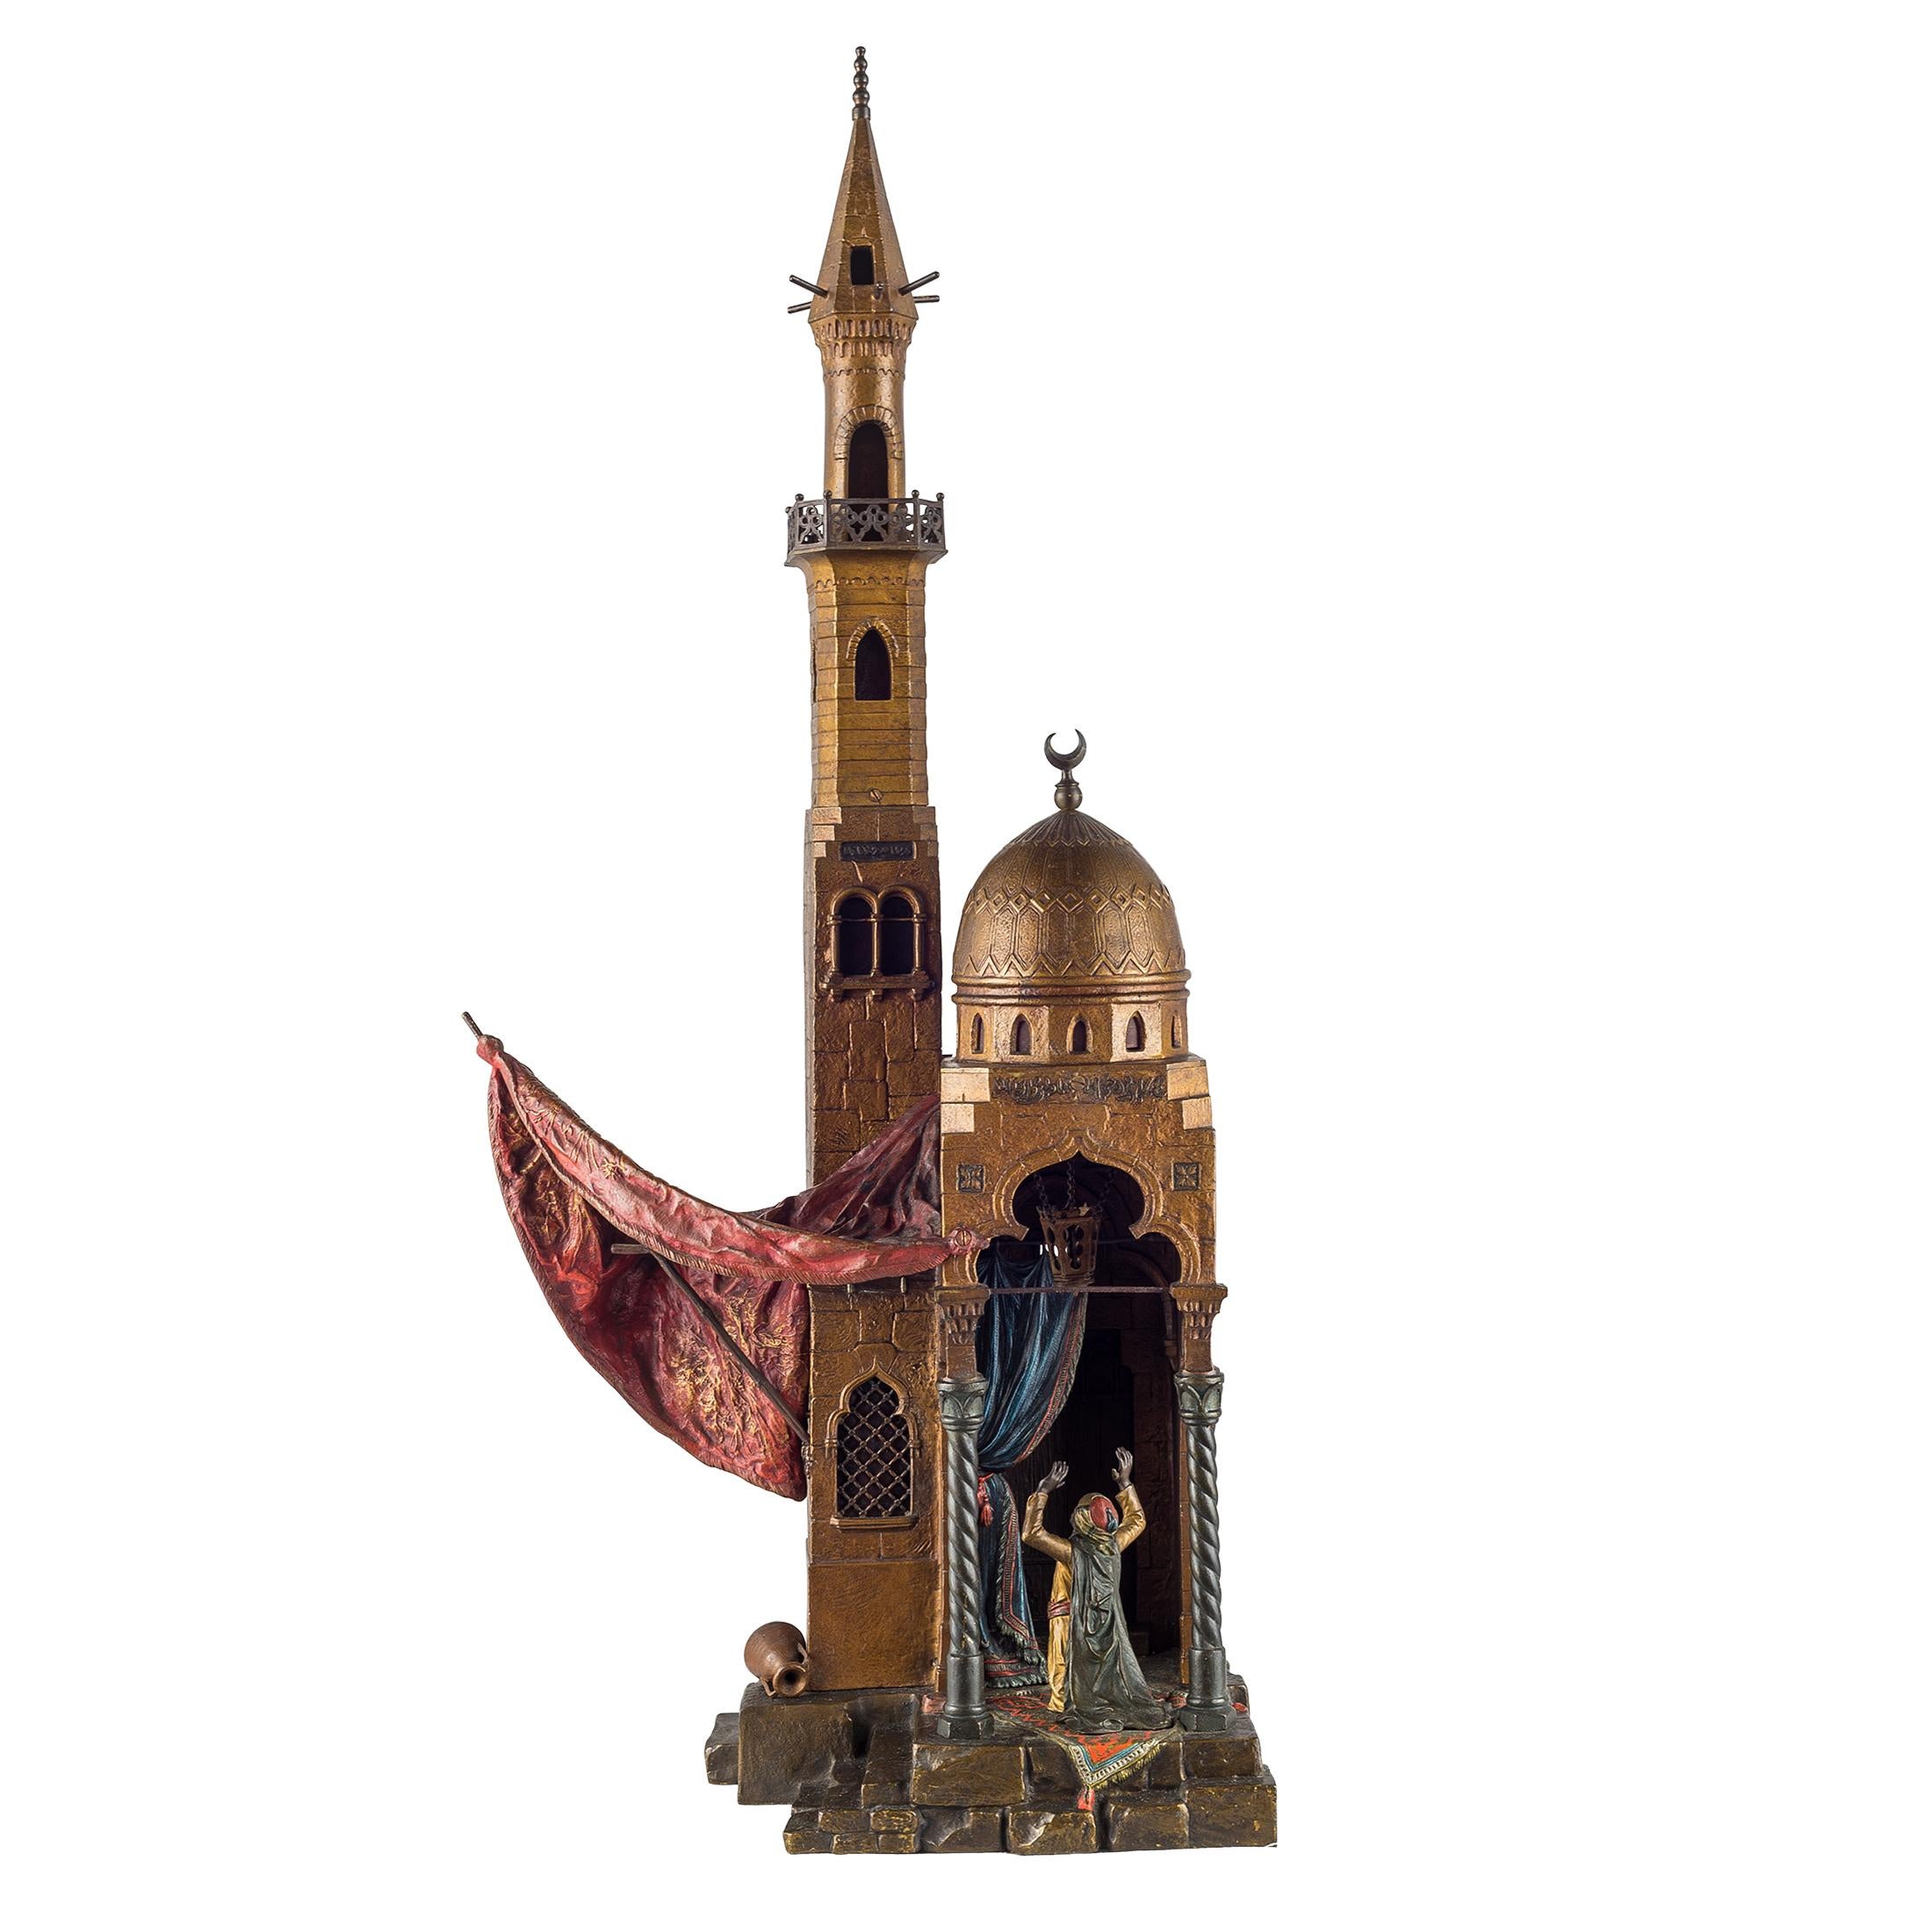 FRANZ BERGMANN
Austrian, (1861-1936)

Praying at a Mosque       

Cold-Painted Bronze Lamp and Sculpture of a man praying in front of a mosque.

30 inches high